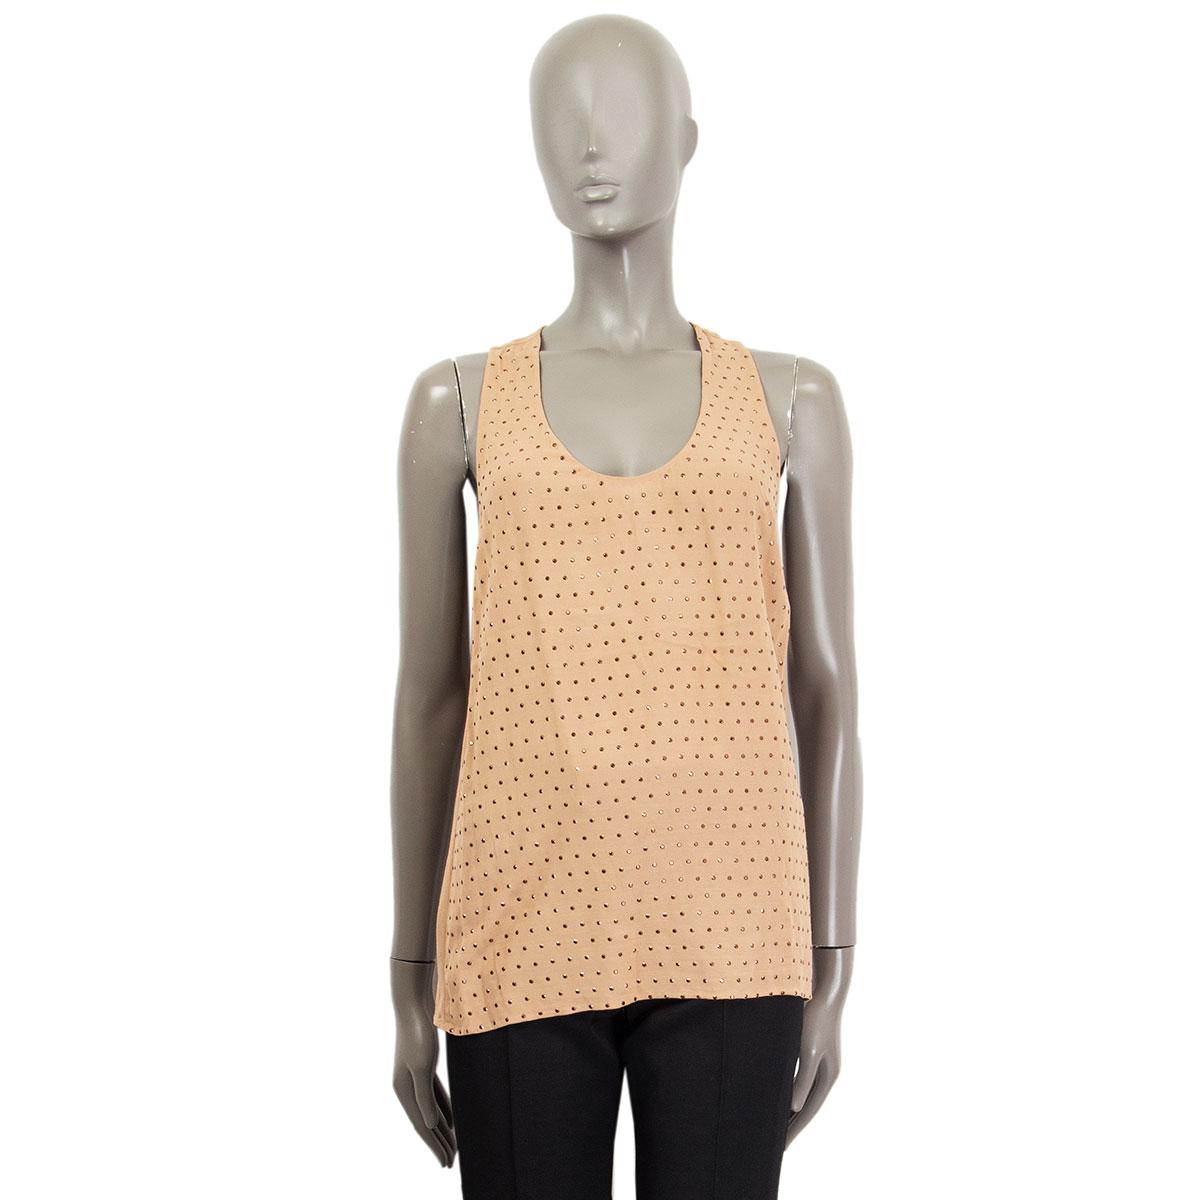 100% authentic Stella McCartney beads tank top in tan viscose (100%) with aluminium (100%) trimming. Slip in fit. Unlined. Has been worn and is in excellent condition.

Measurements
Tag Size	38
Size	XS
Shoulder Width	25cm (9.8in)
Bust From	82cm